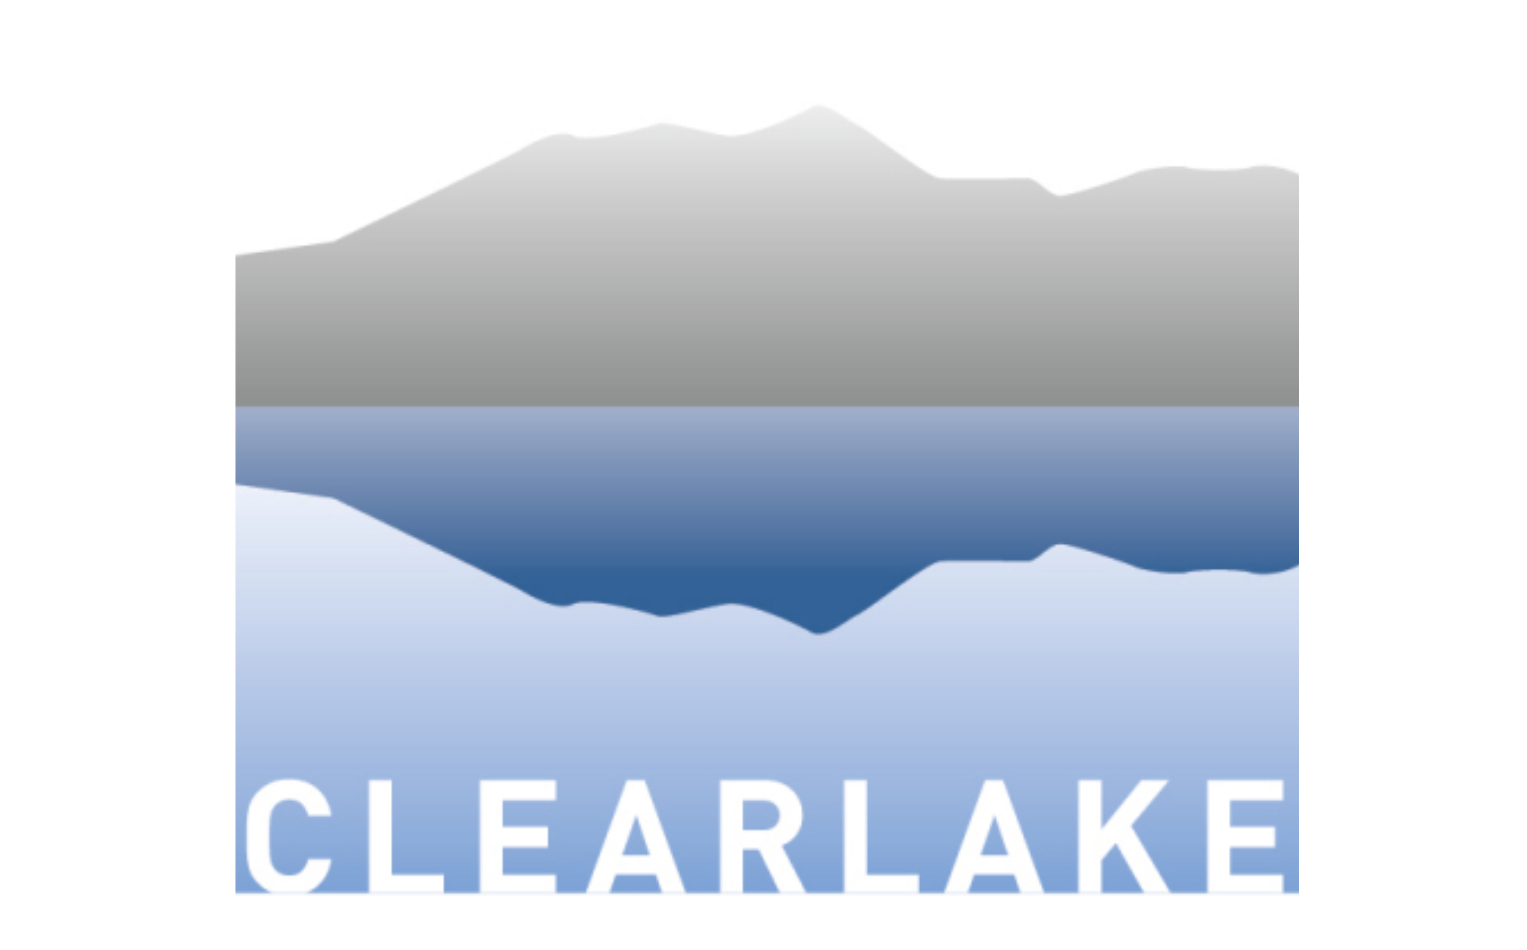 Provation is backed by Clearlake Capital Group, L.P., an investment firm founded in 2006 operating integrated businesses across private equity, credit and other related strategies.